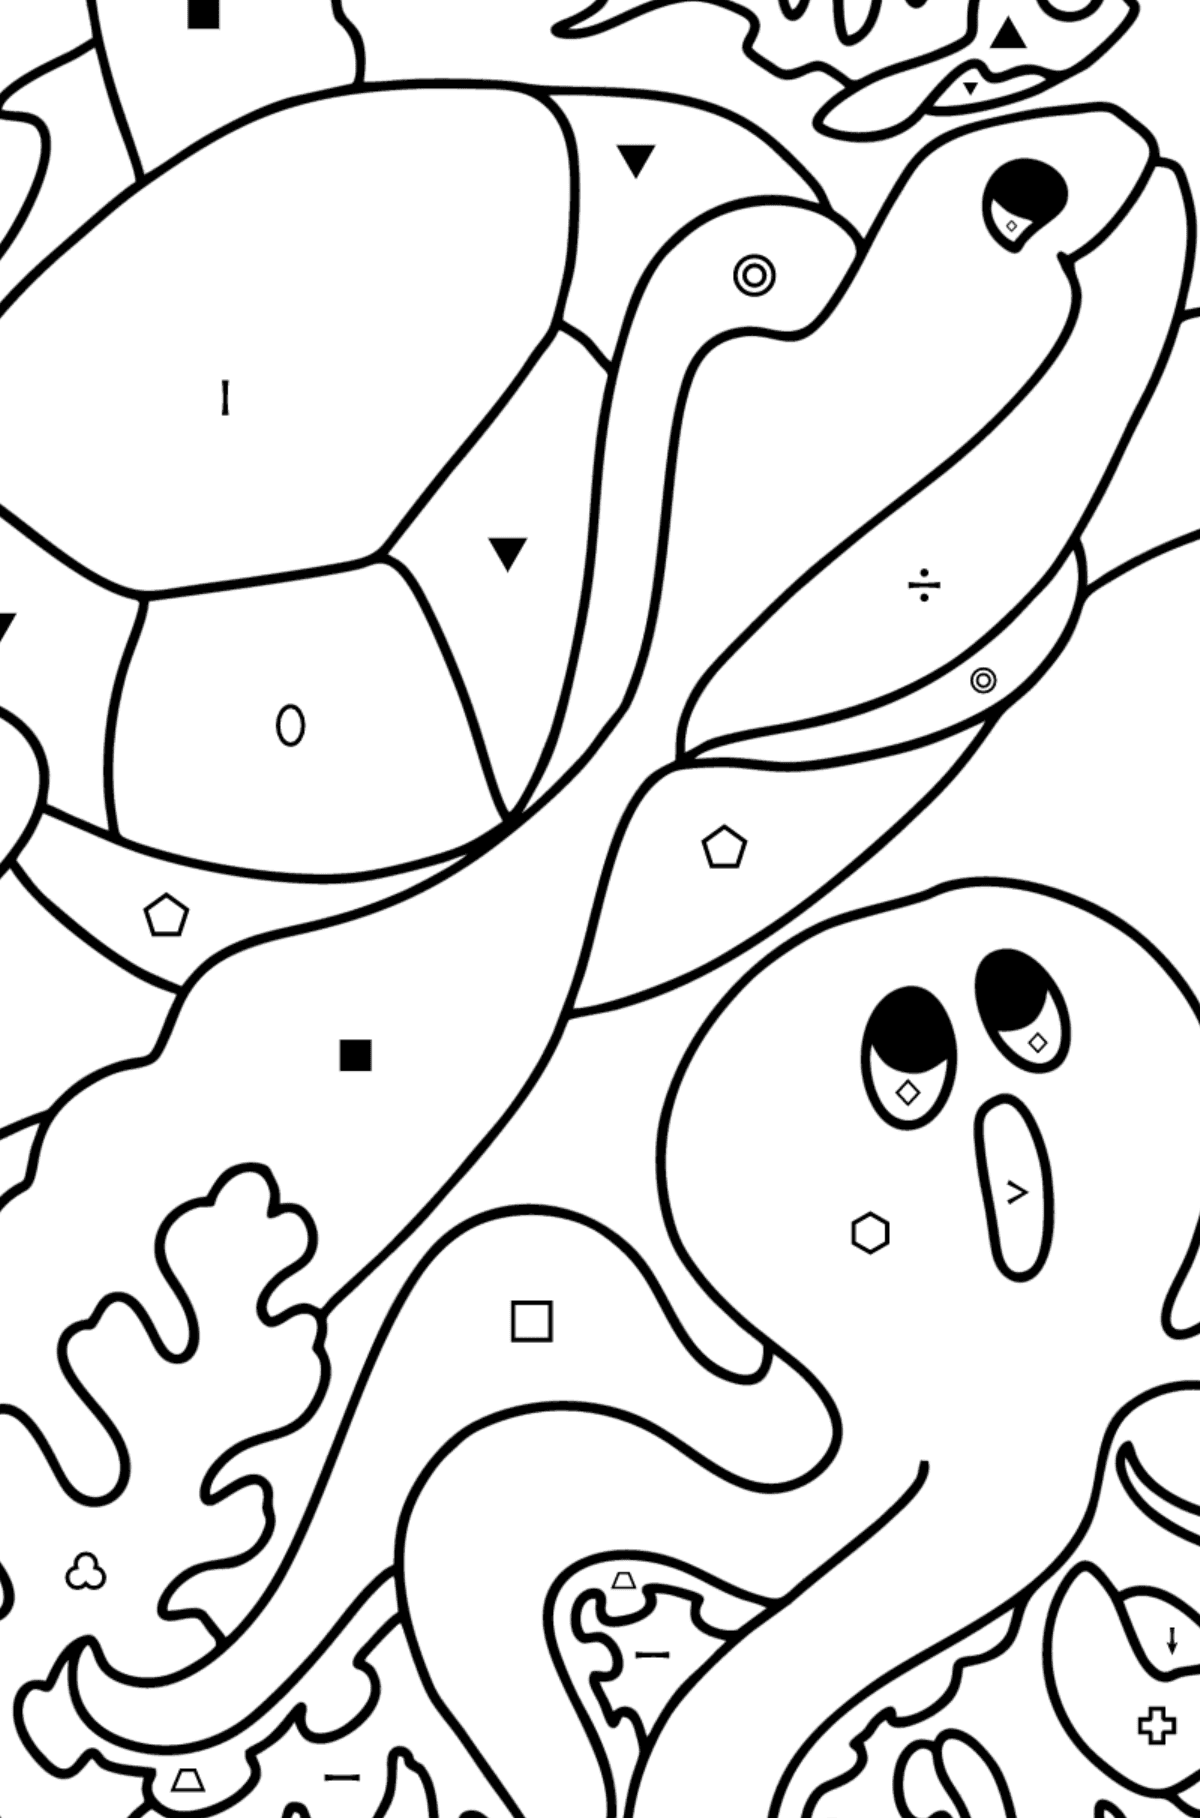 Fish, Turtle, Crab and Octopus coloring page - Coloring by Symbols and Geometric Shapes for Kids